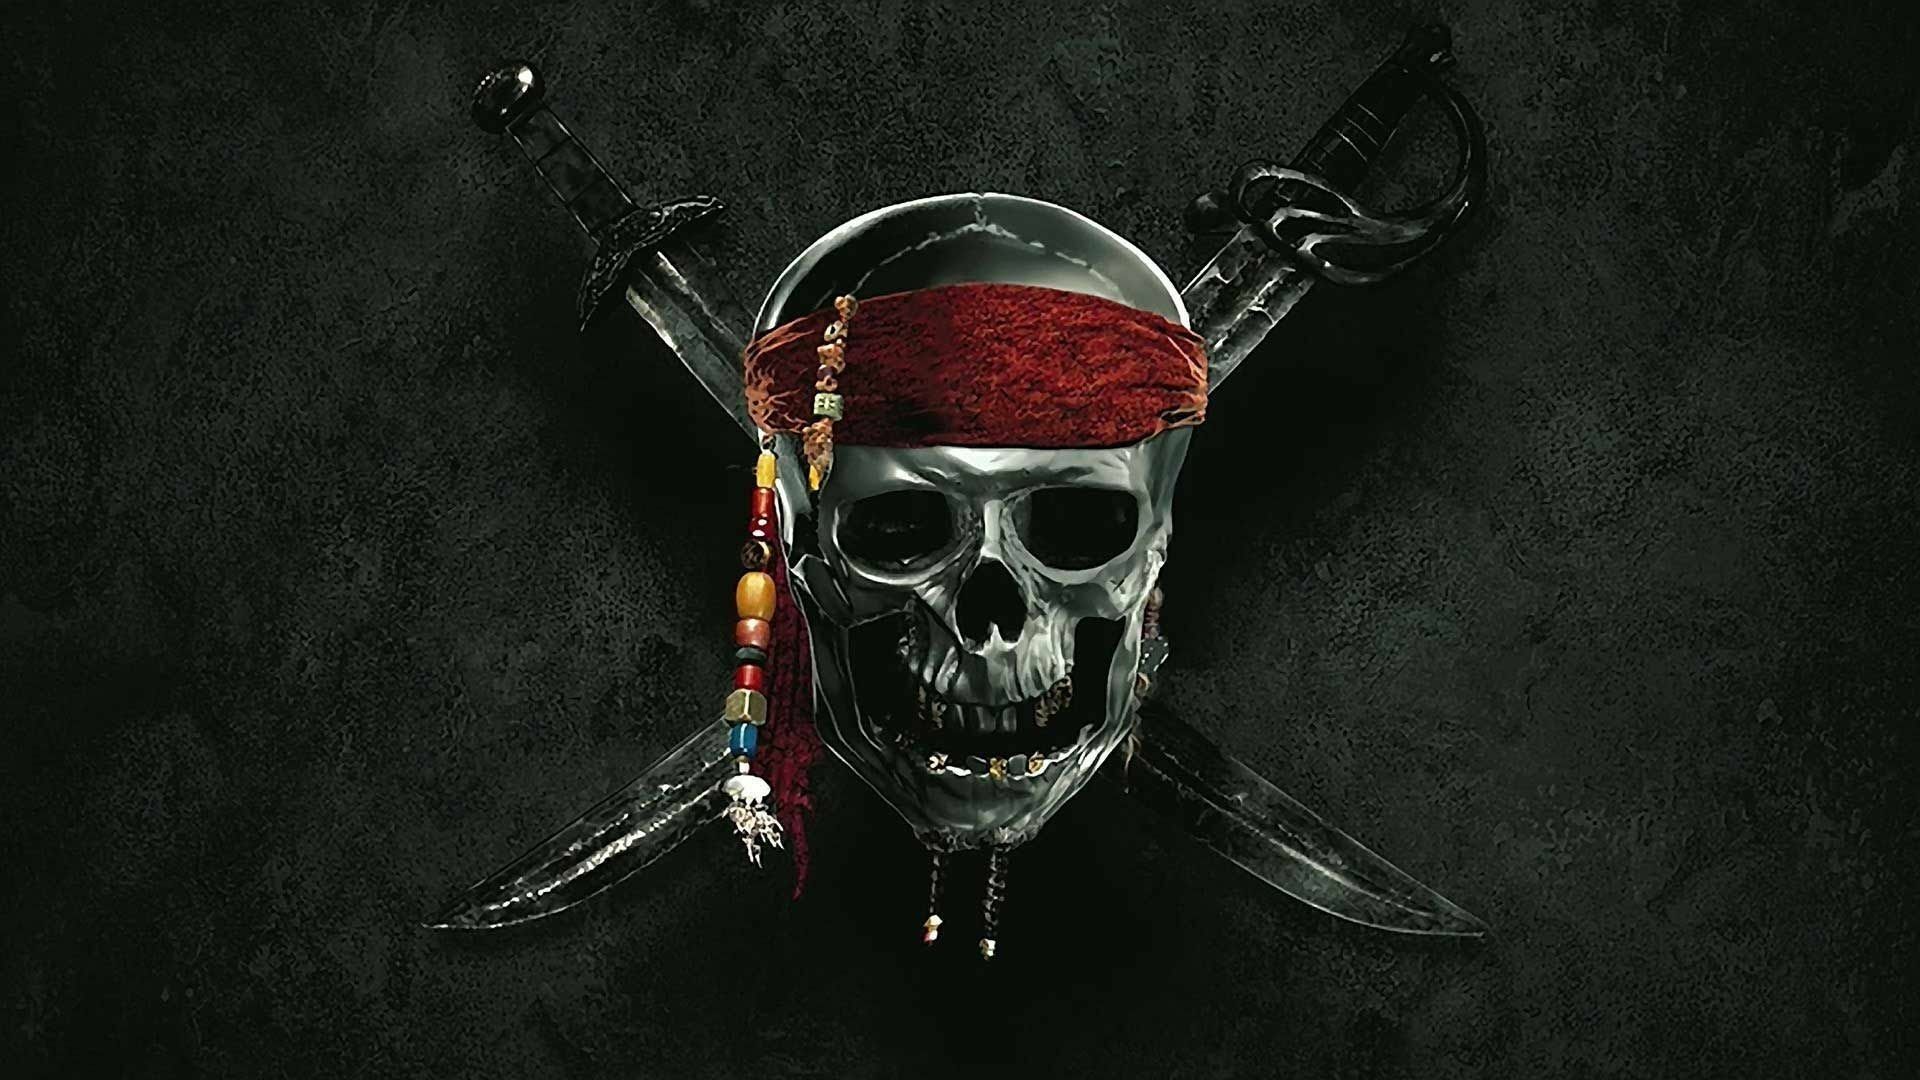 Pirates of the Caribbean wallpaper [DOWNLOAD FREE]